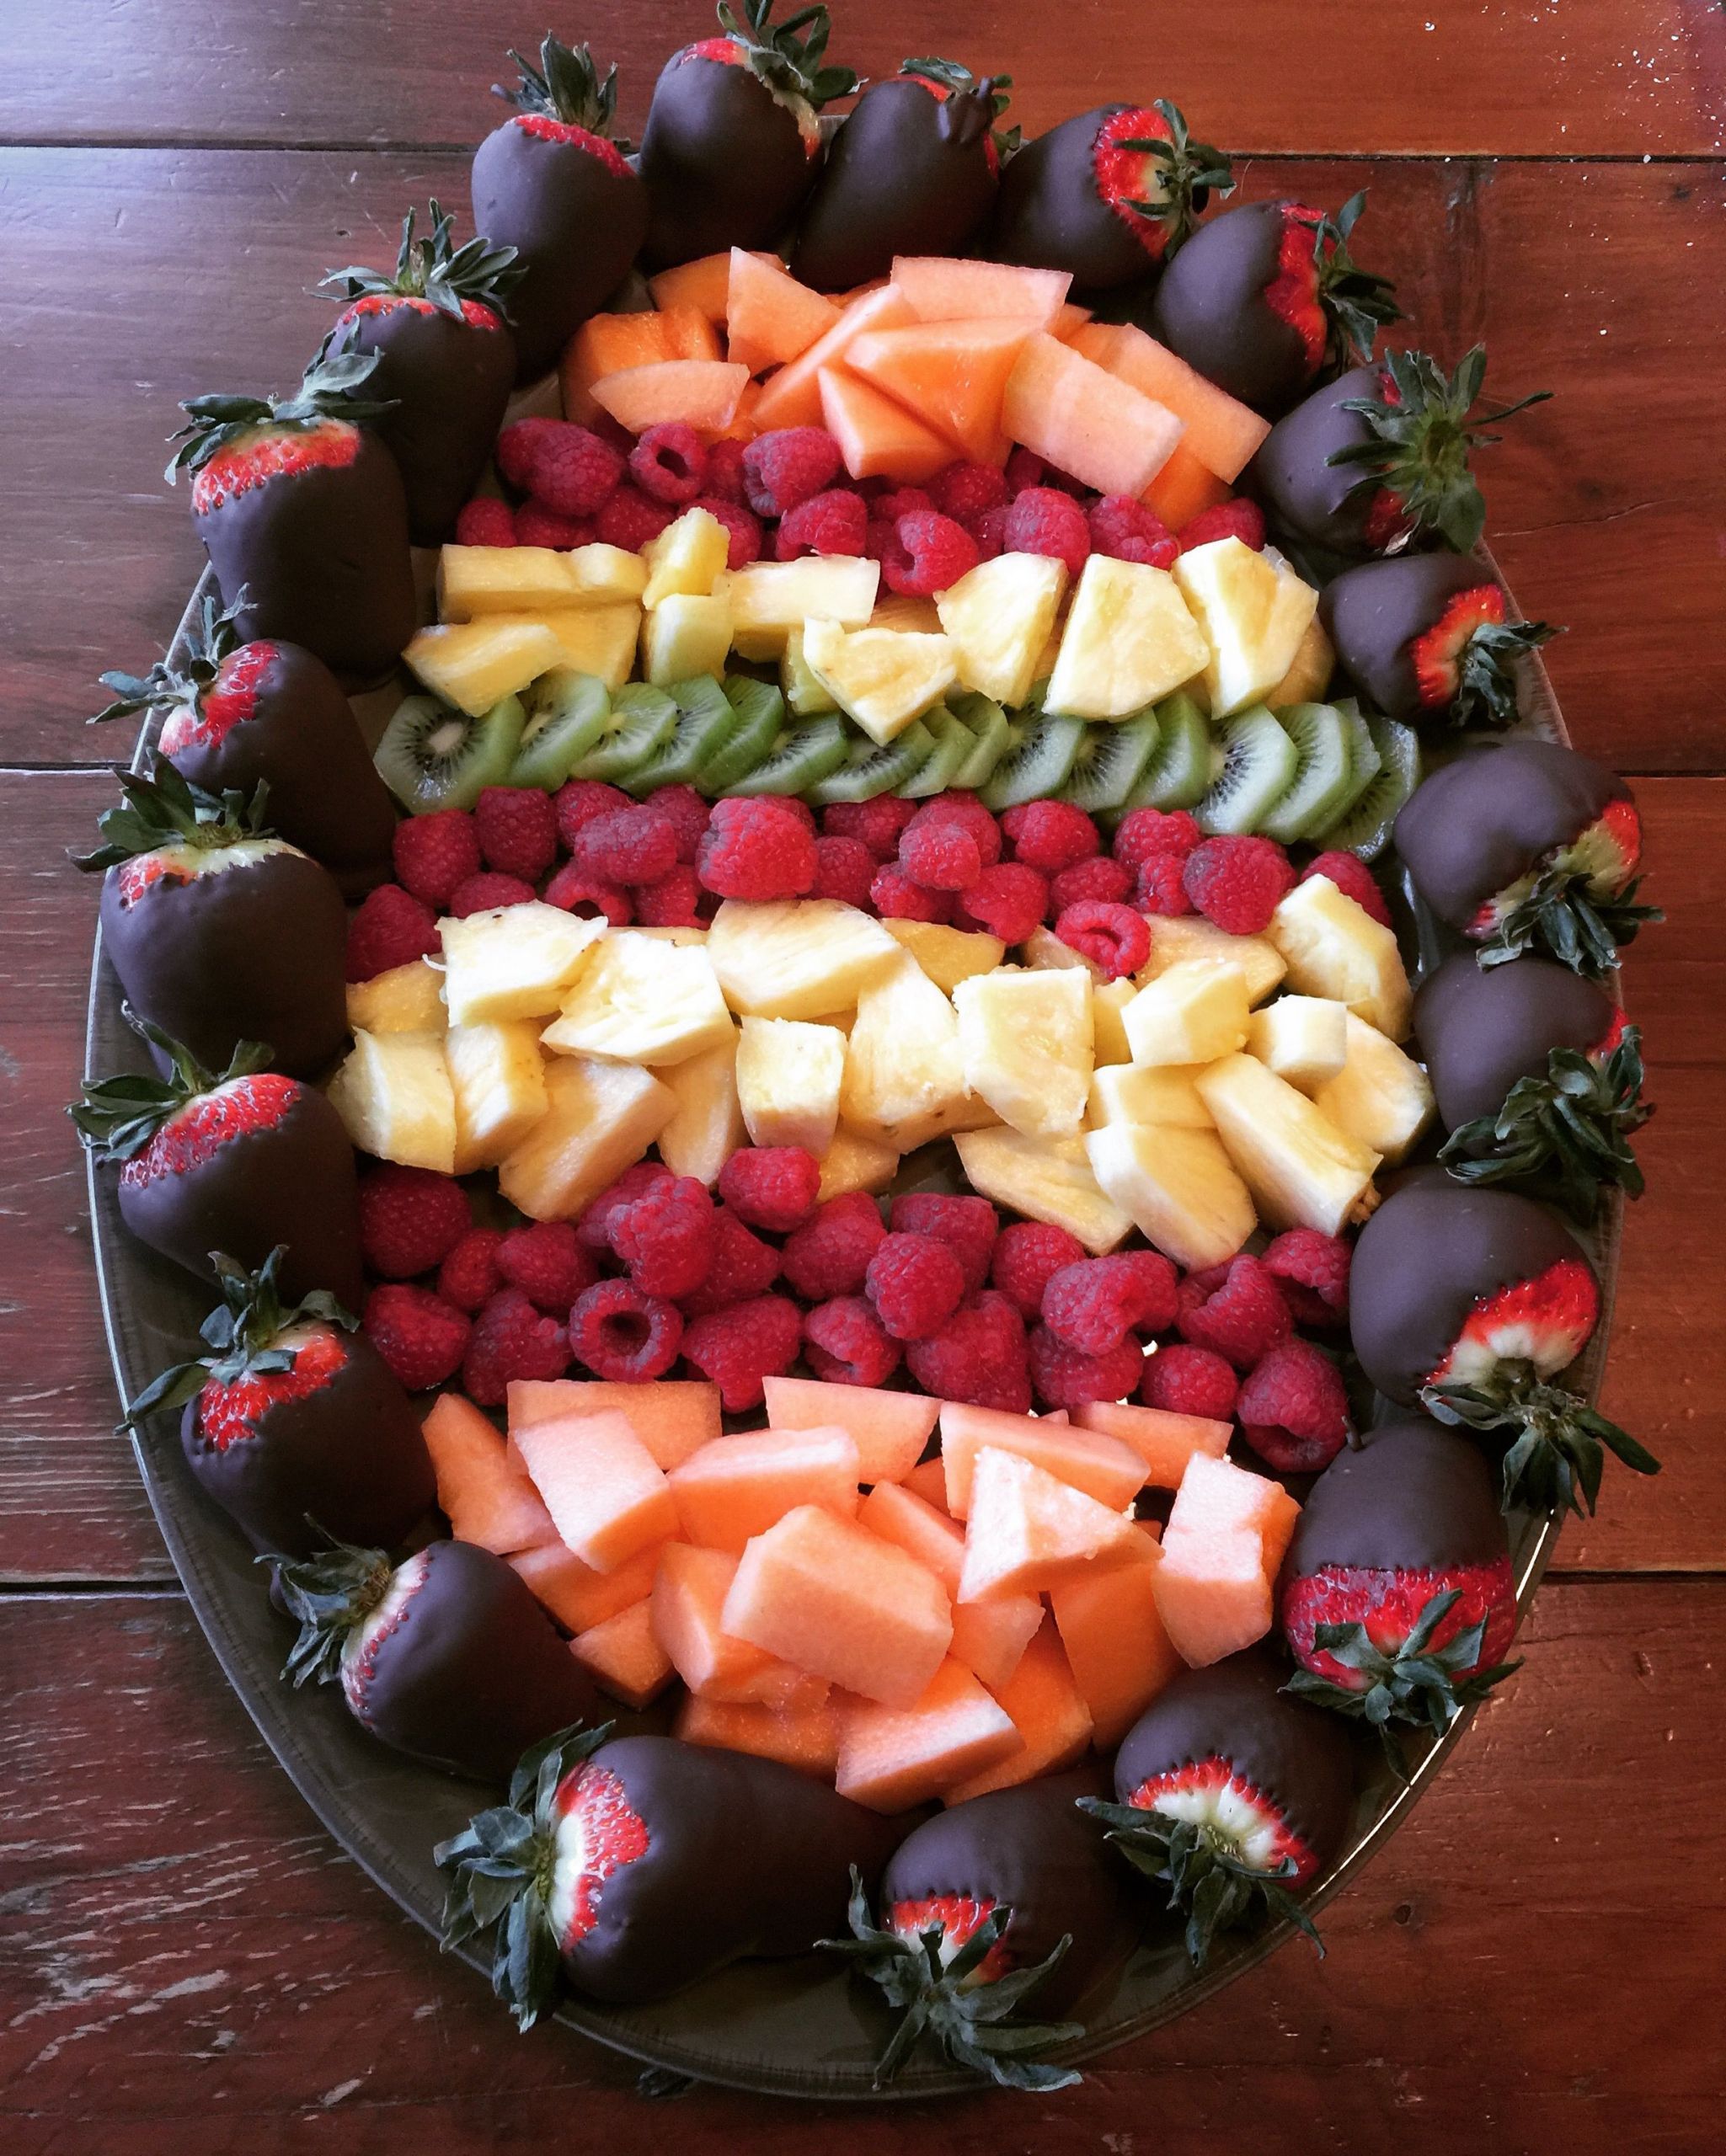 Easter Fruit Tray Ideas
 Easter fruit tray